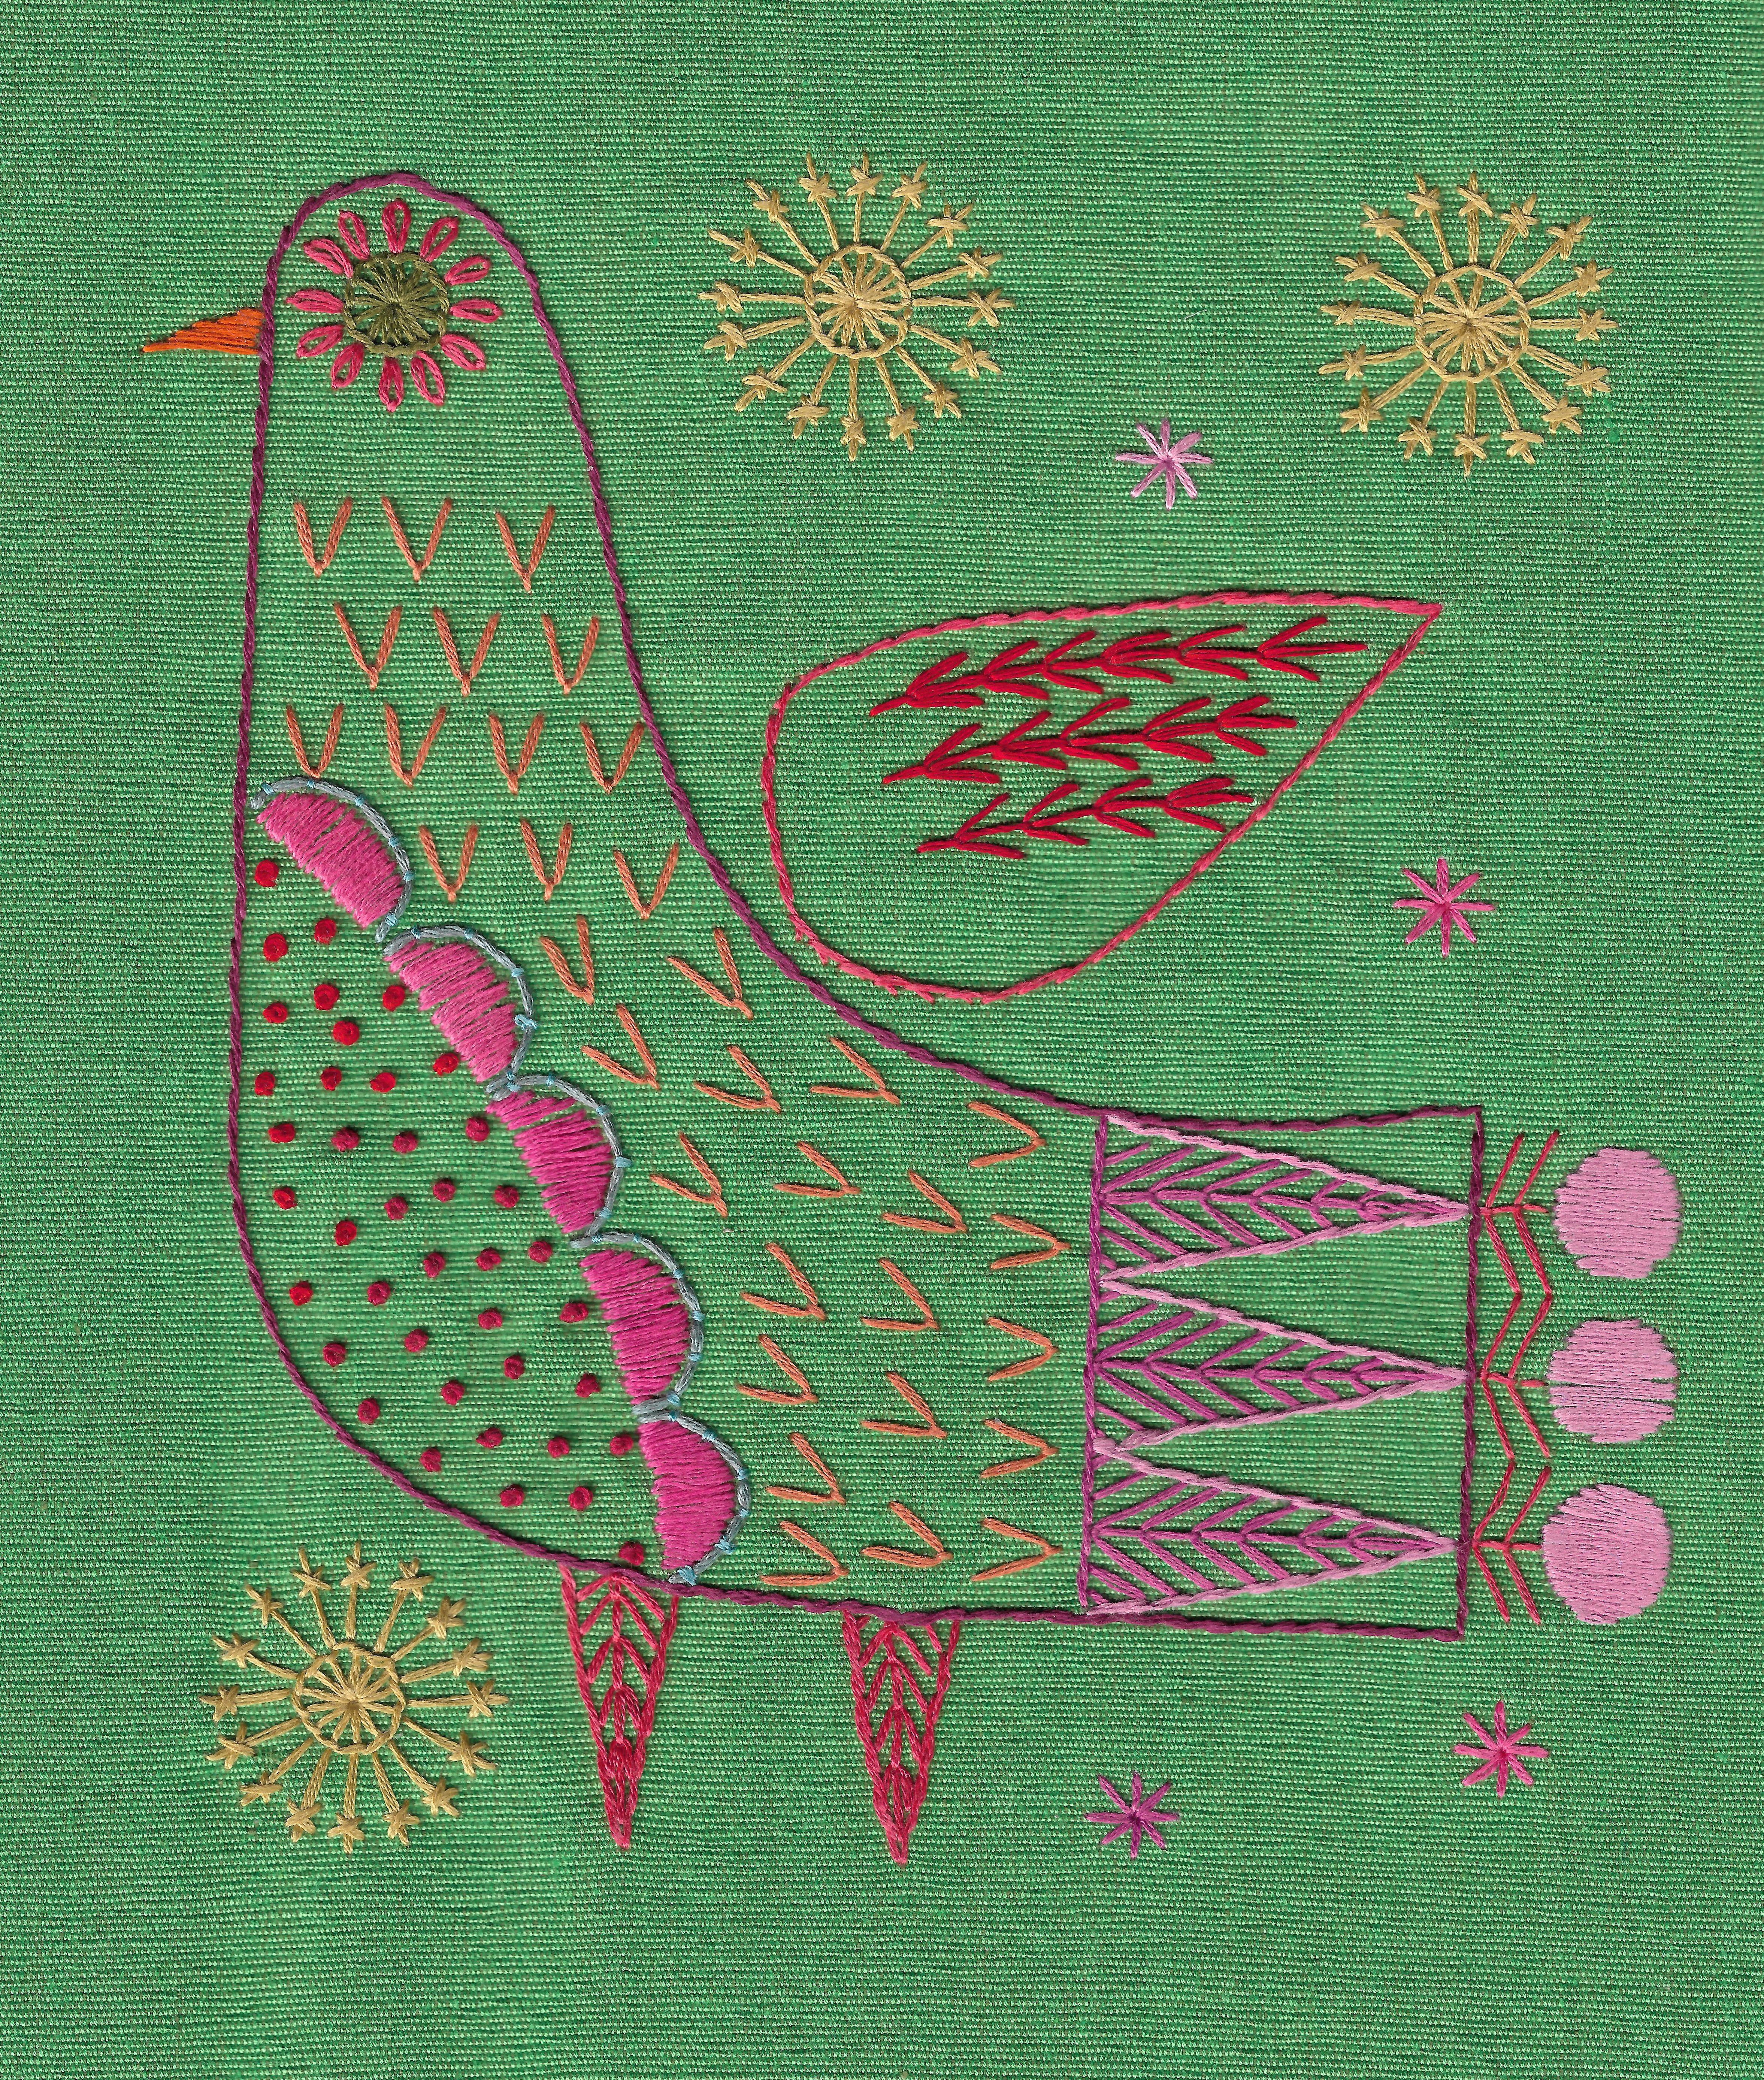 How To Transfer Embroidery Pattern Bright Bird Iron On Transfer Embroidery Pattern